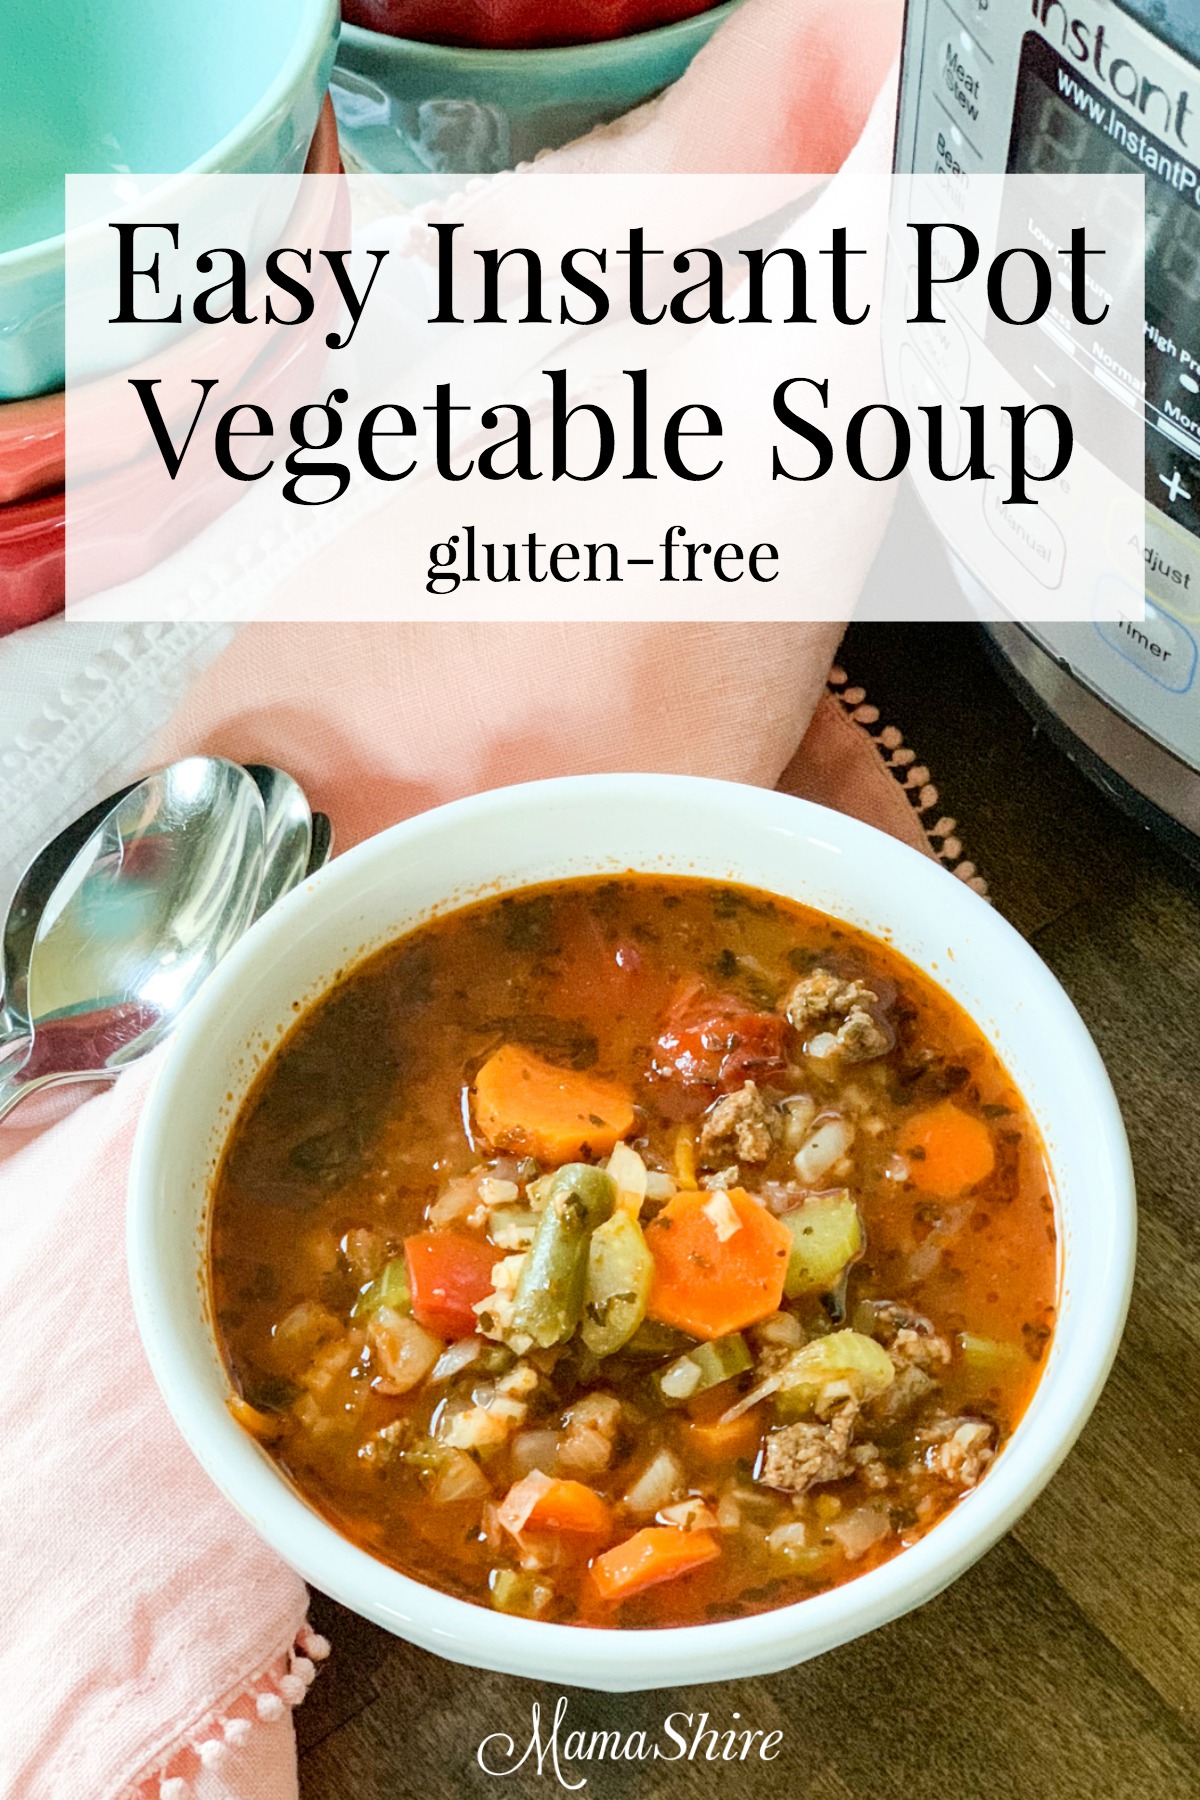 Easy Instant Pot Vegetable Soup (Gluten-Free) - MamaShire